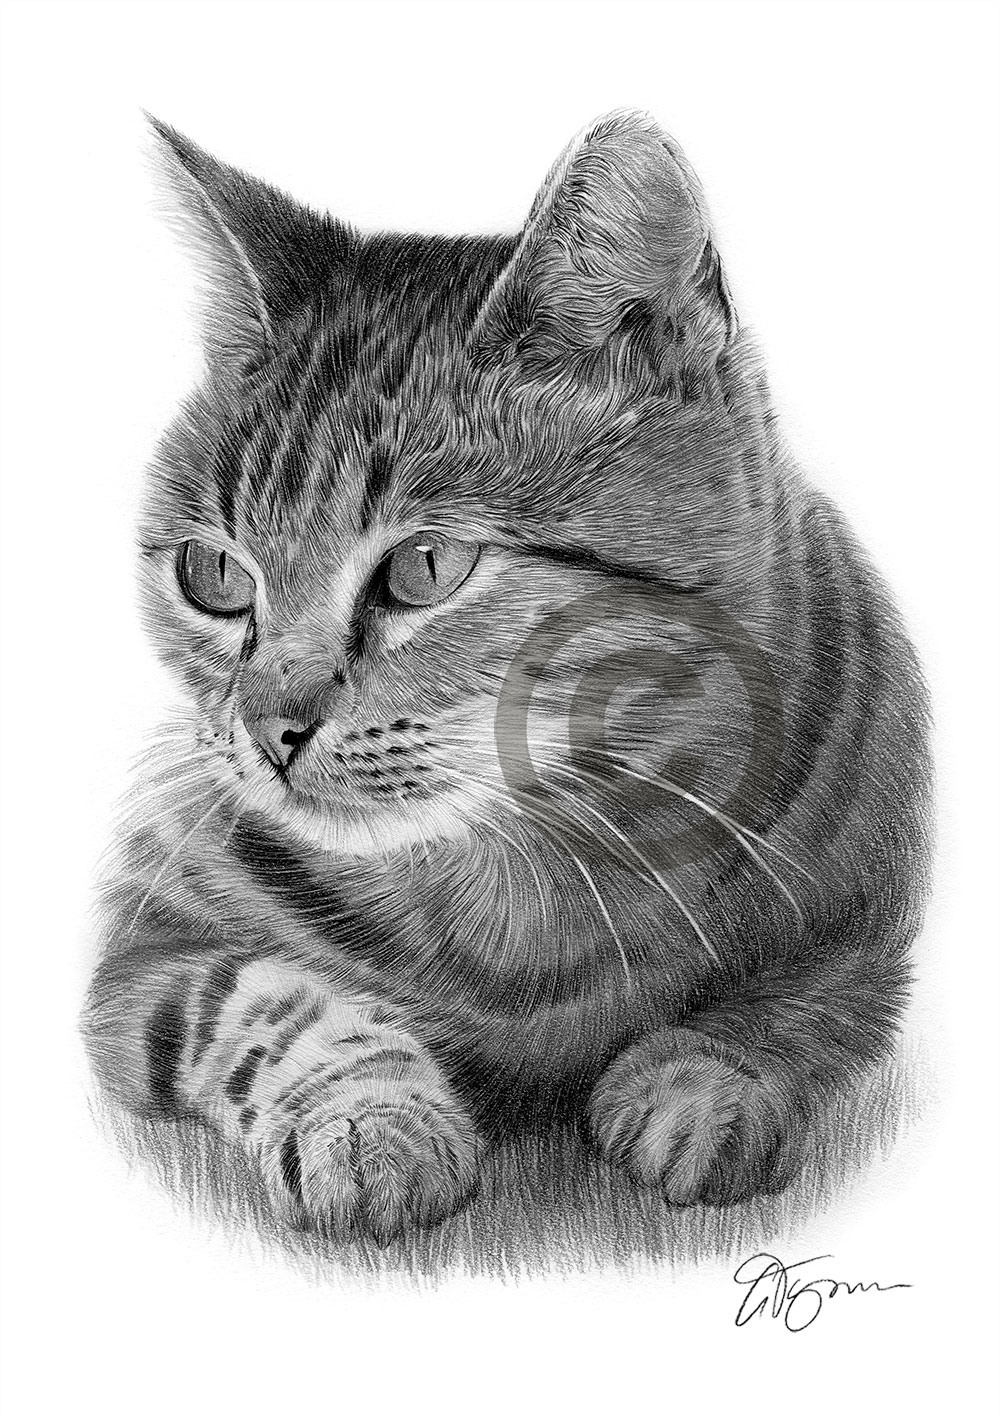 Pencil drawing of a cat by artist Gary Tymon